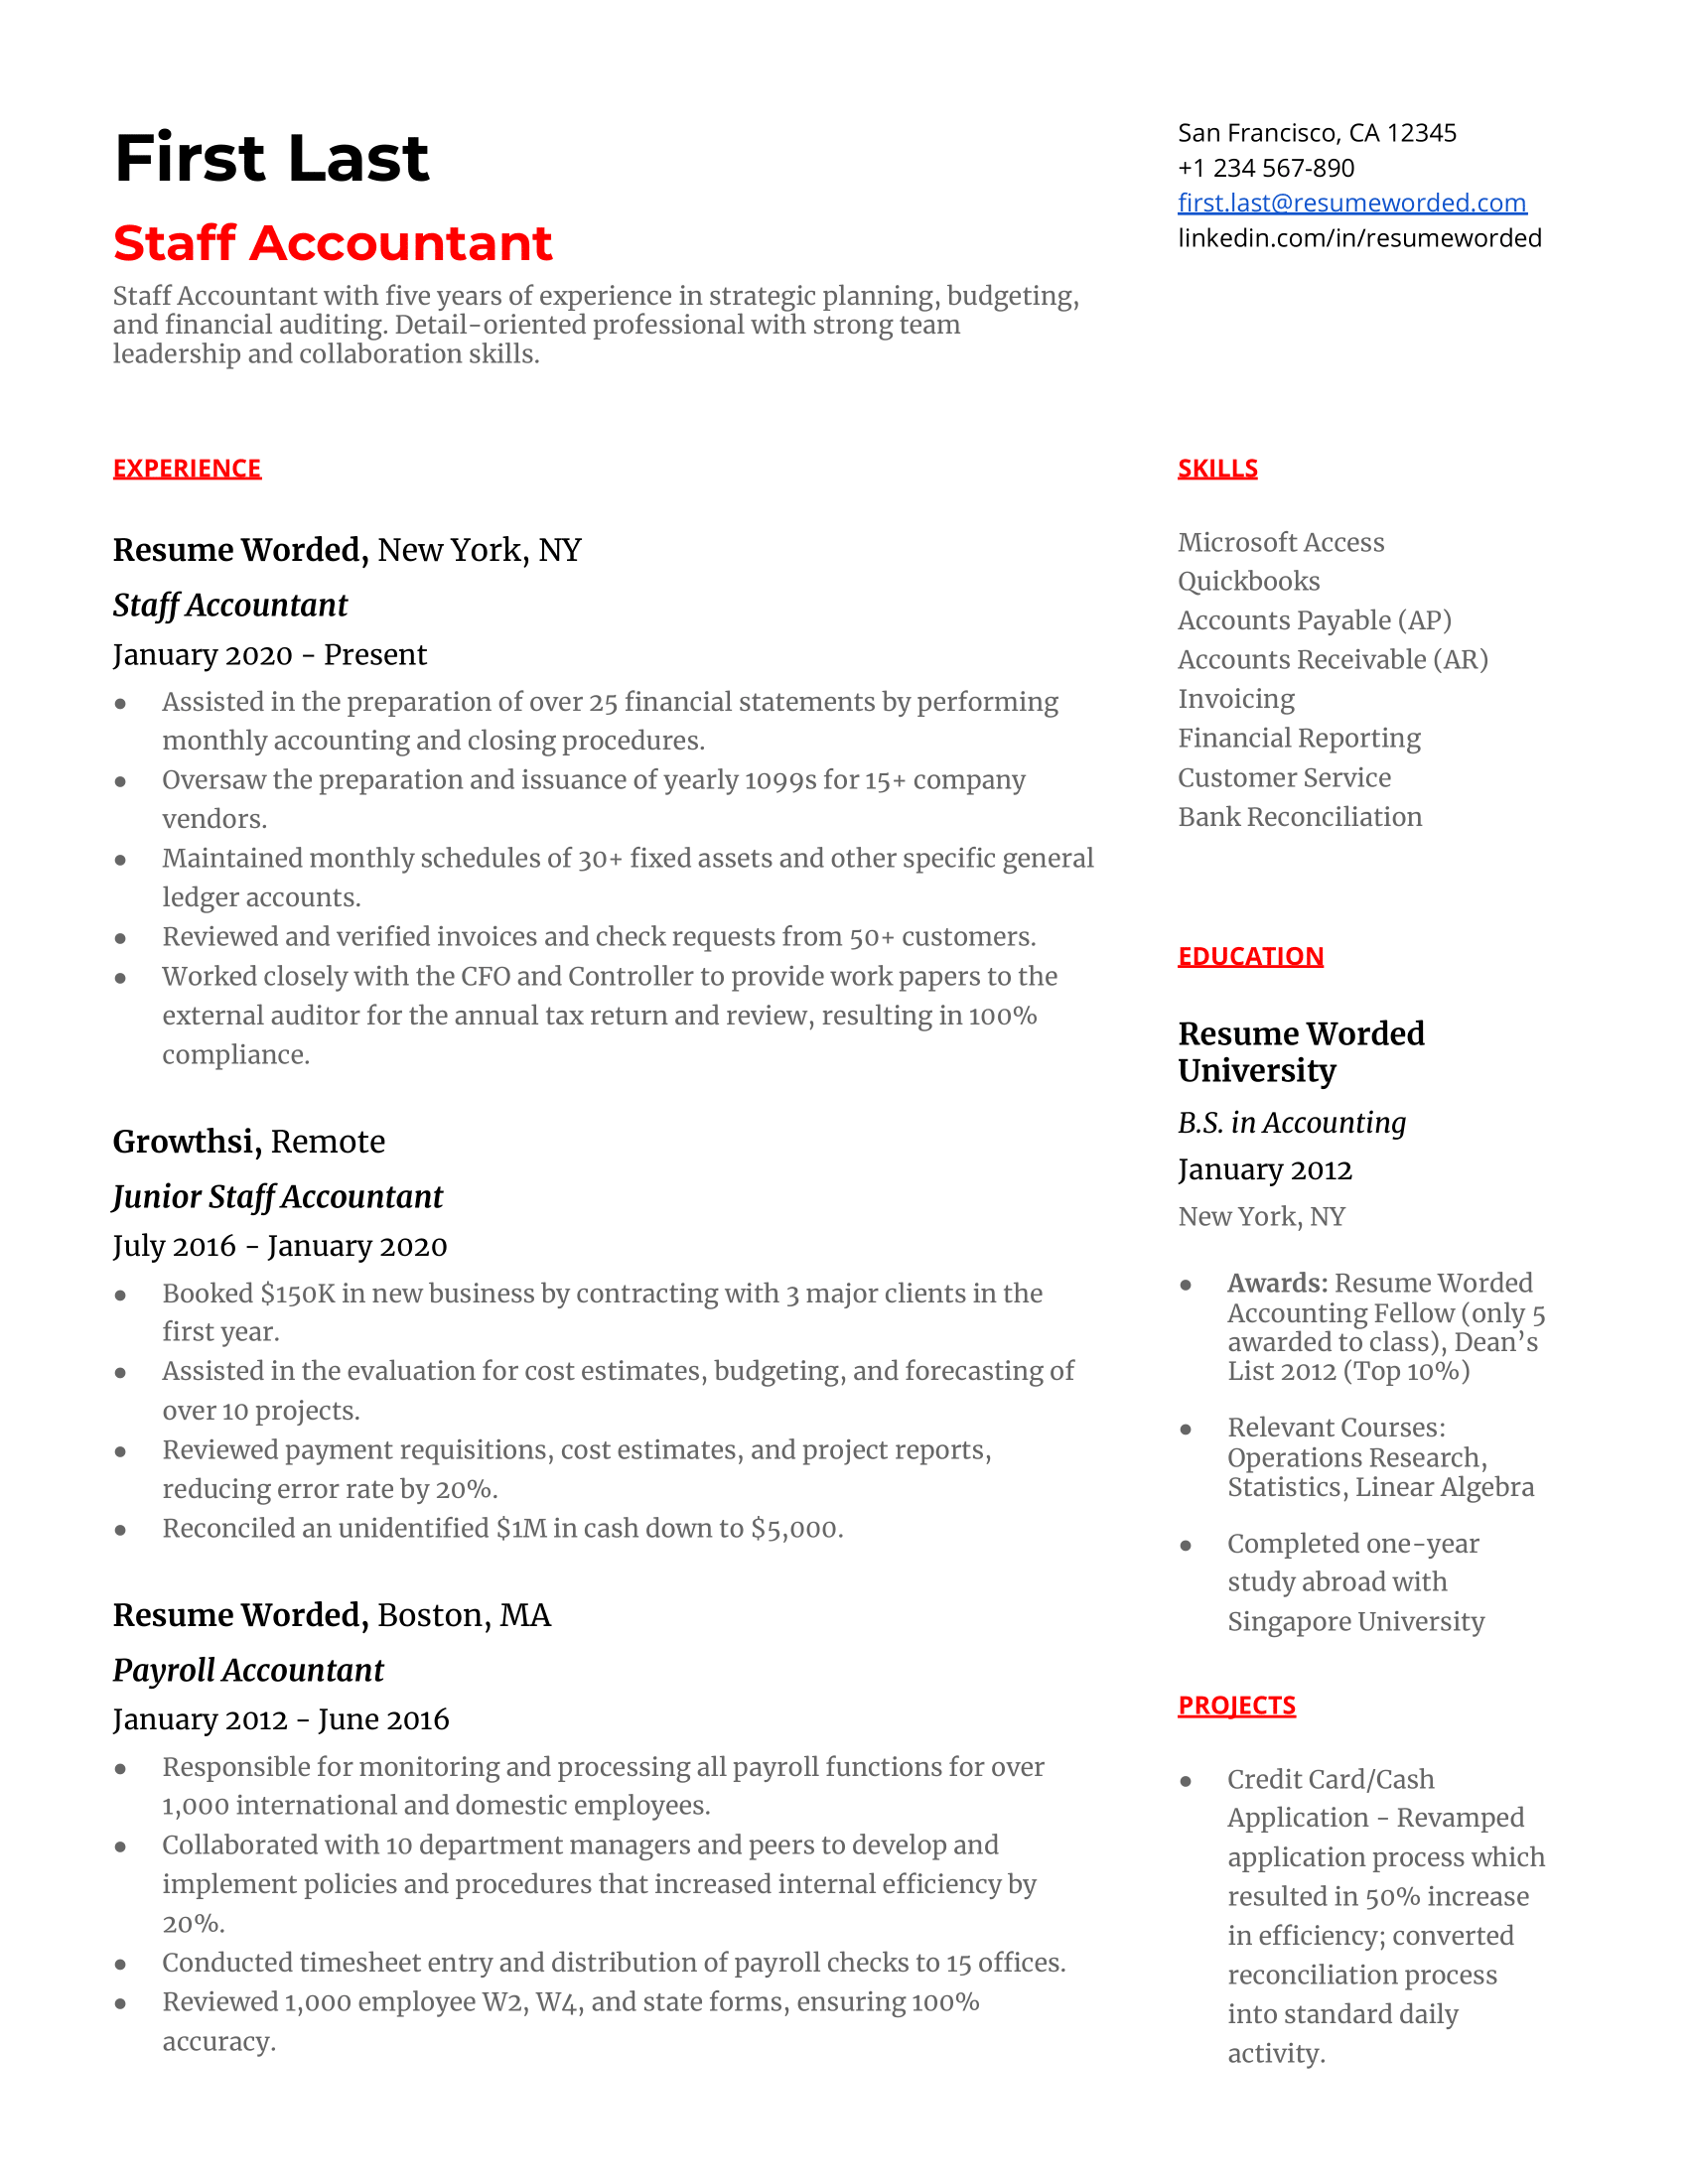 A staff accountant resume template showcasing academic value.